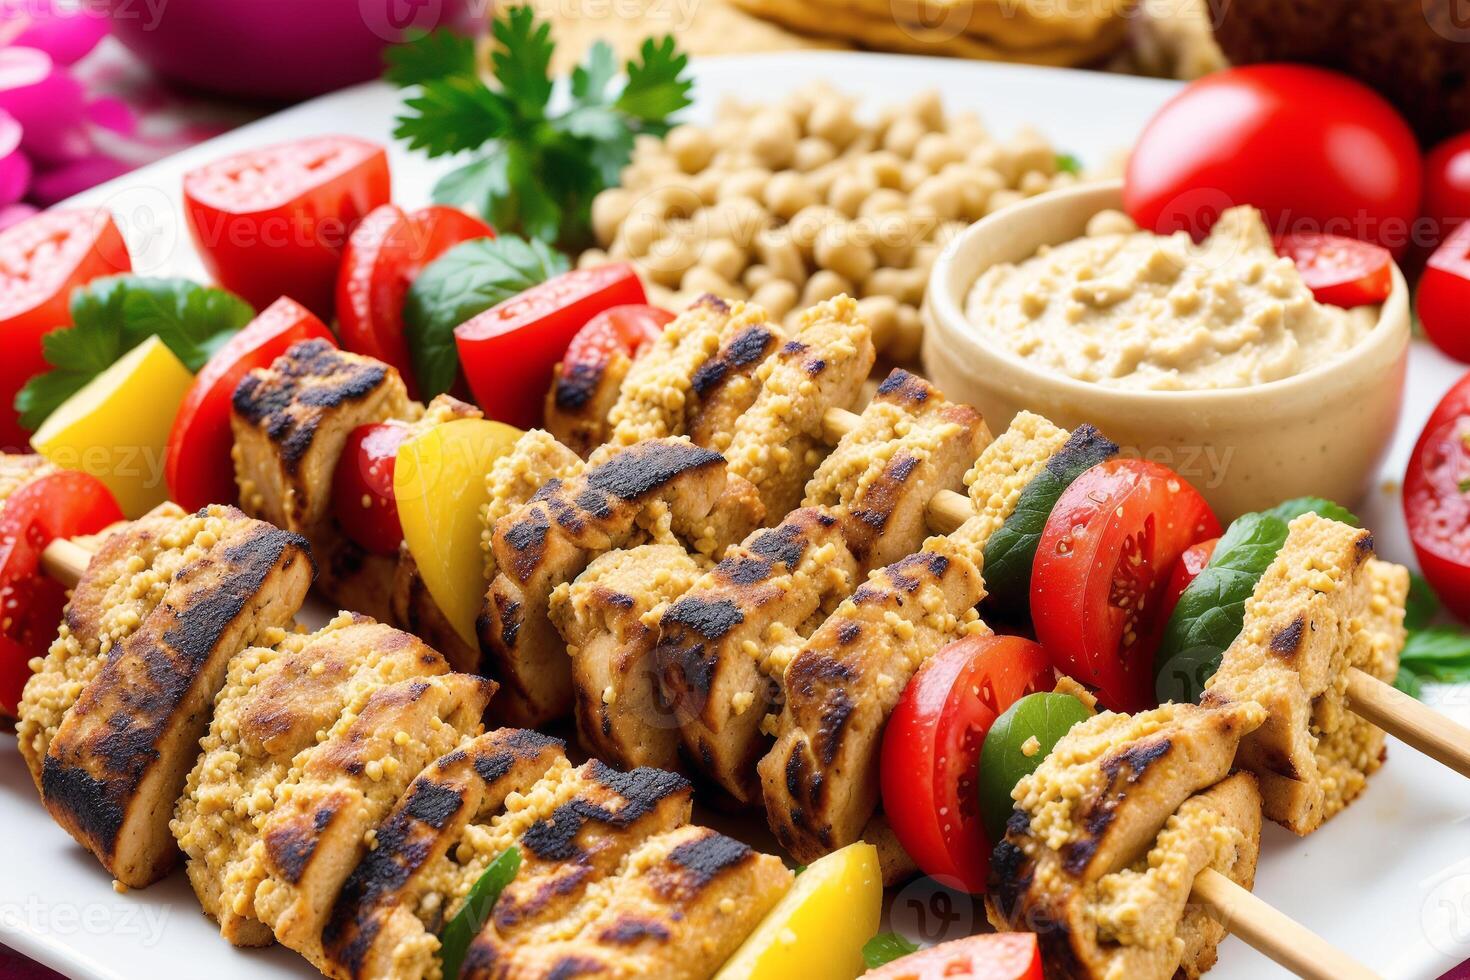 Lebanese cuisine. Chicken shish kebab on skewers served with couscous and vegetables. photo